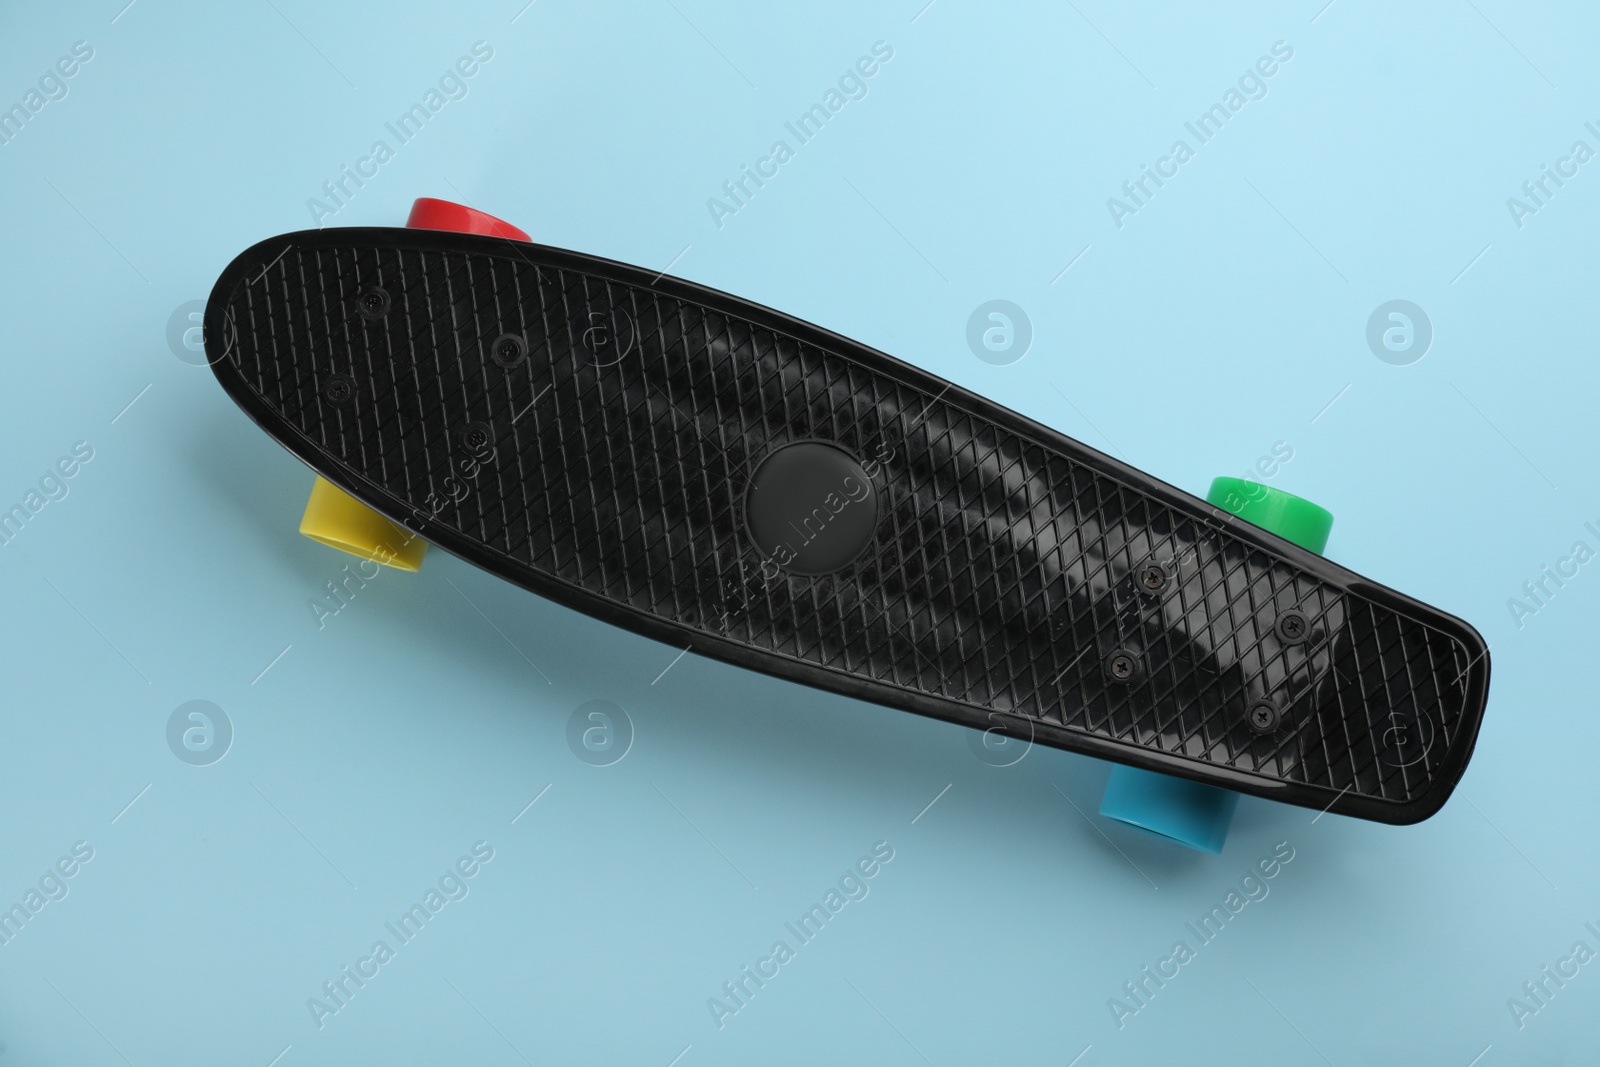 Photo of Black skateboard on turquoise background, top view